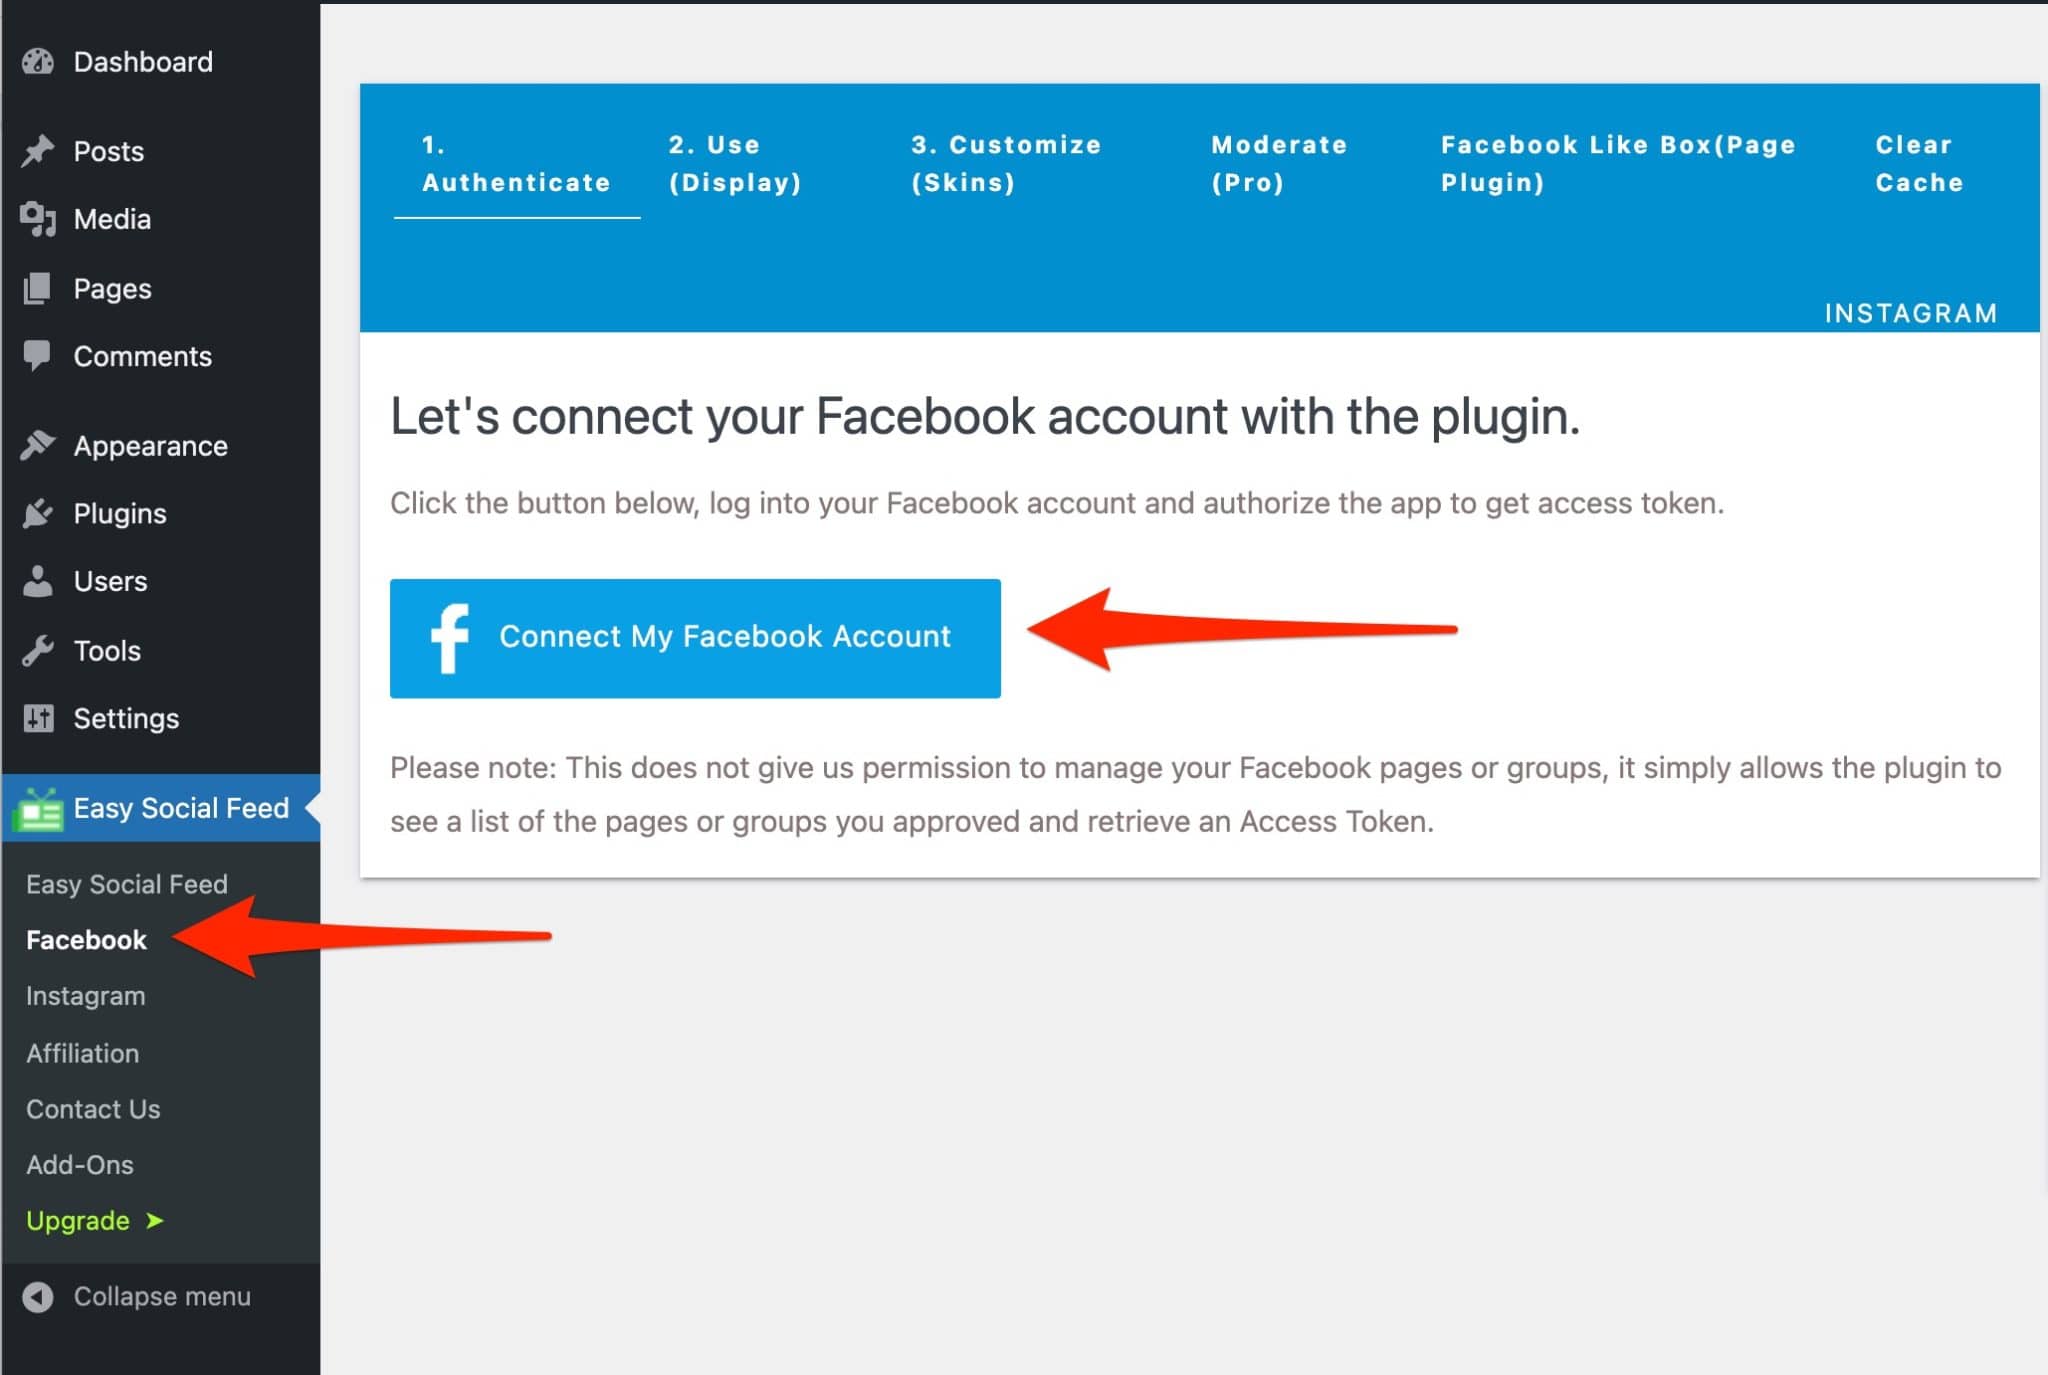 Connect a Facebook account to the Easy Social Feed Facebook plugin on WordPress.